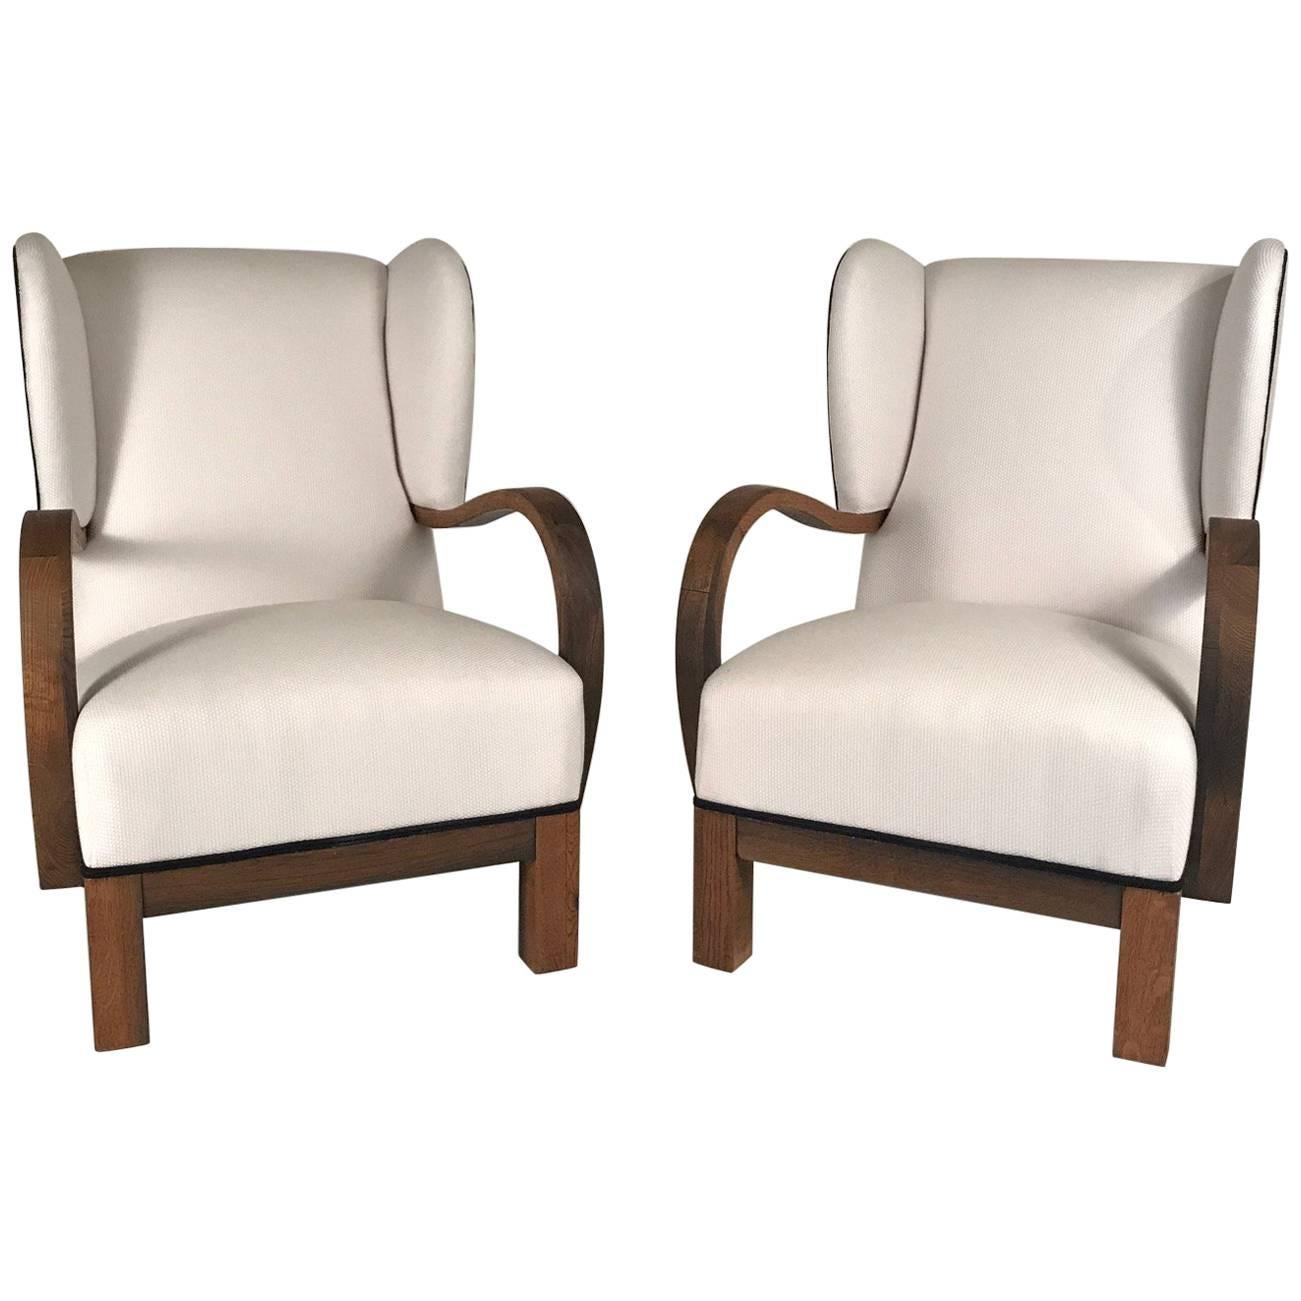 Handsome, sturdy pair of Danish modern wing-back open armchairs with exaggeratedly curved arms in oak
reupholstered in white fabric with black trim, art deco period.